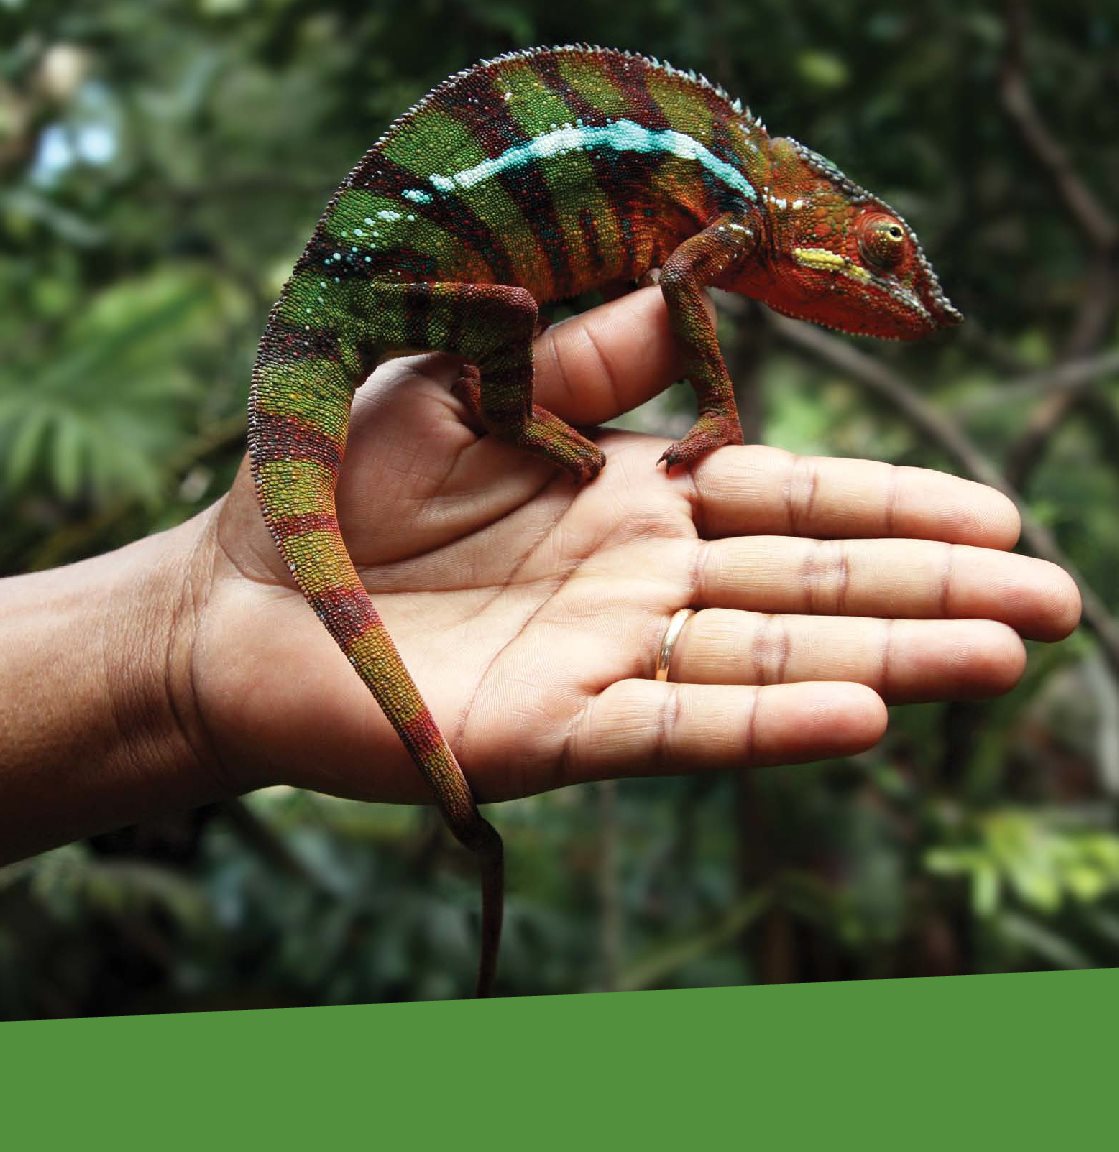 Chameleons are known for being able to change the colors of their skin - photo 7